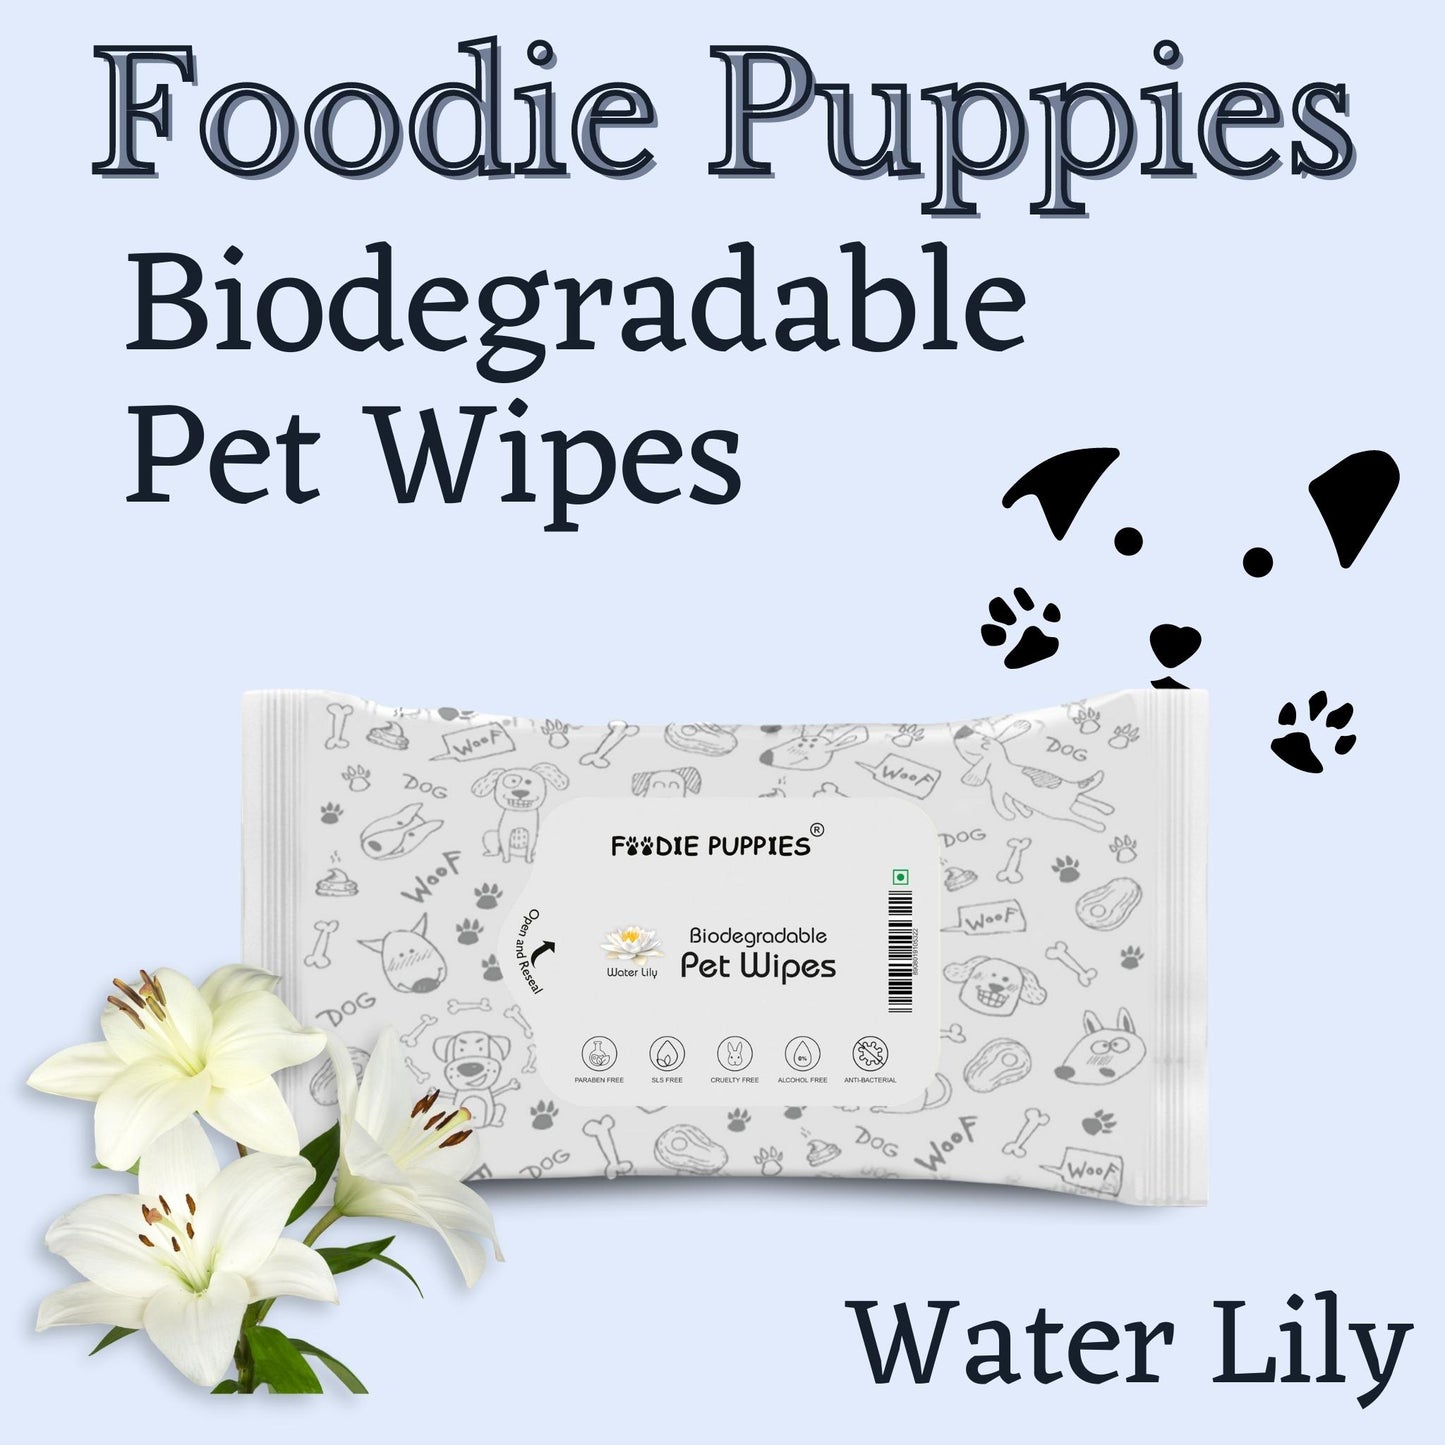 Foodie Puppies Biodegradable Water Lily Pet Wet Wipes 10 Pulls, Pack of 3